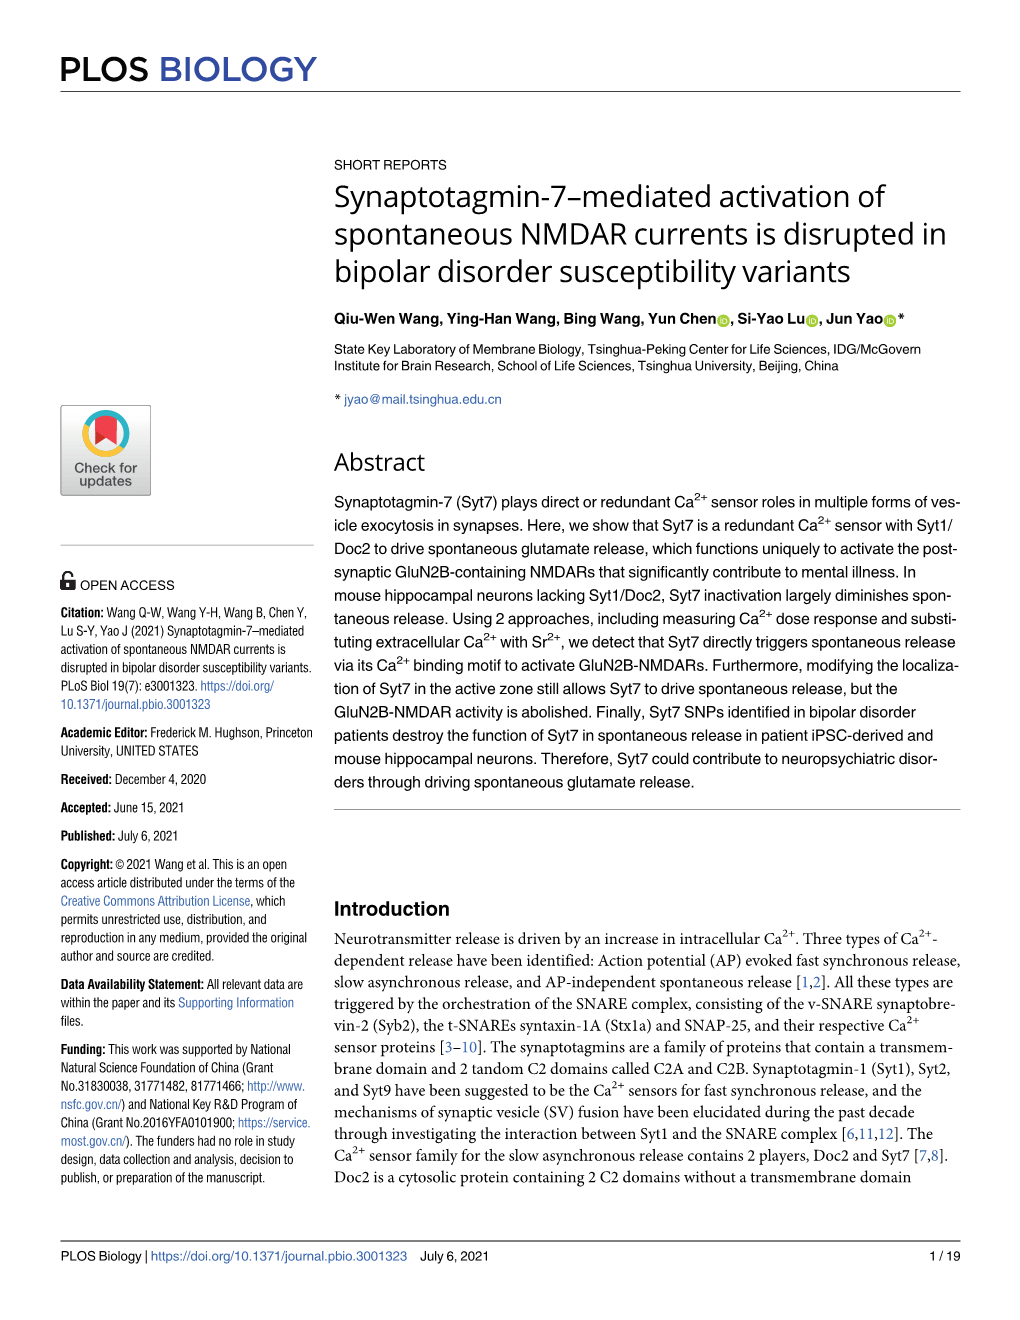 Synaptotagmin-7–Mediated Activation of Spontaneous NMDAR Currents Is Disrupted in Bipolar Disorder Susceptibility Variants